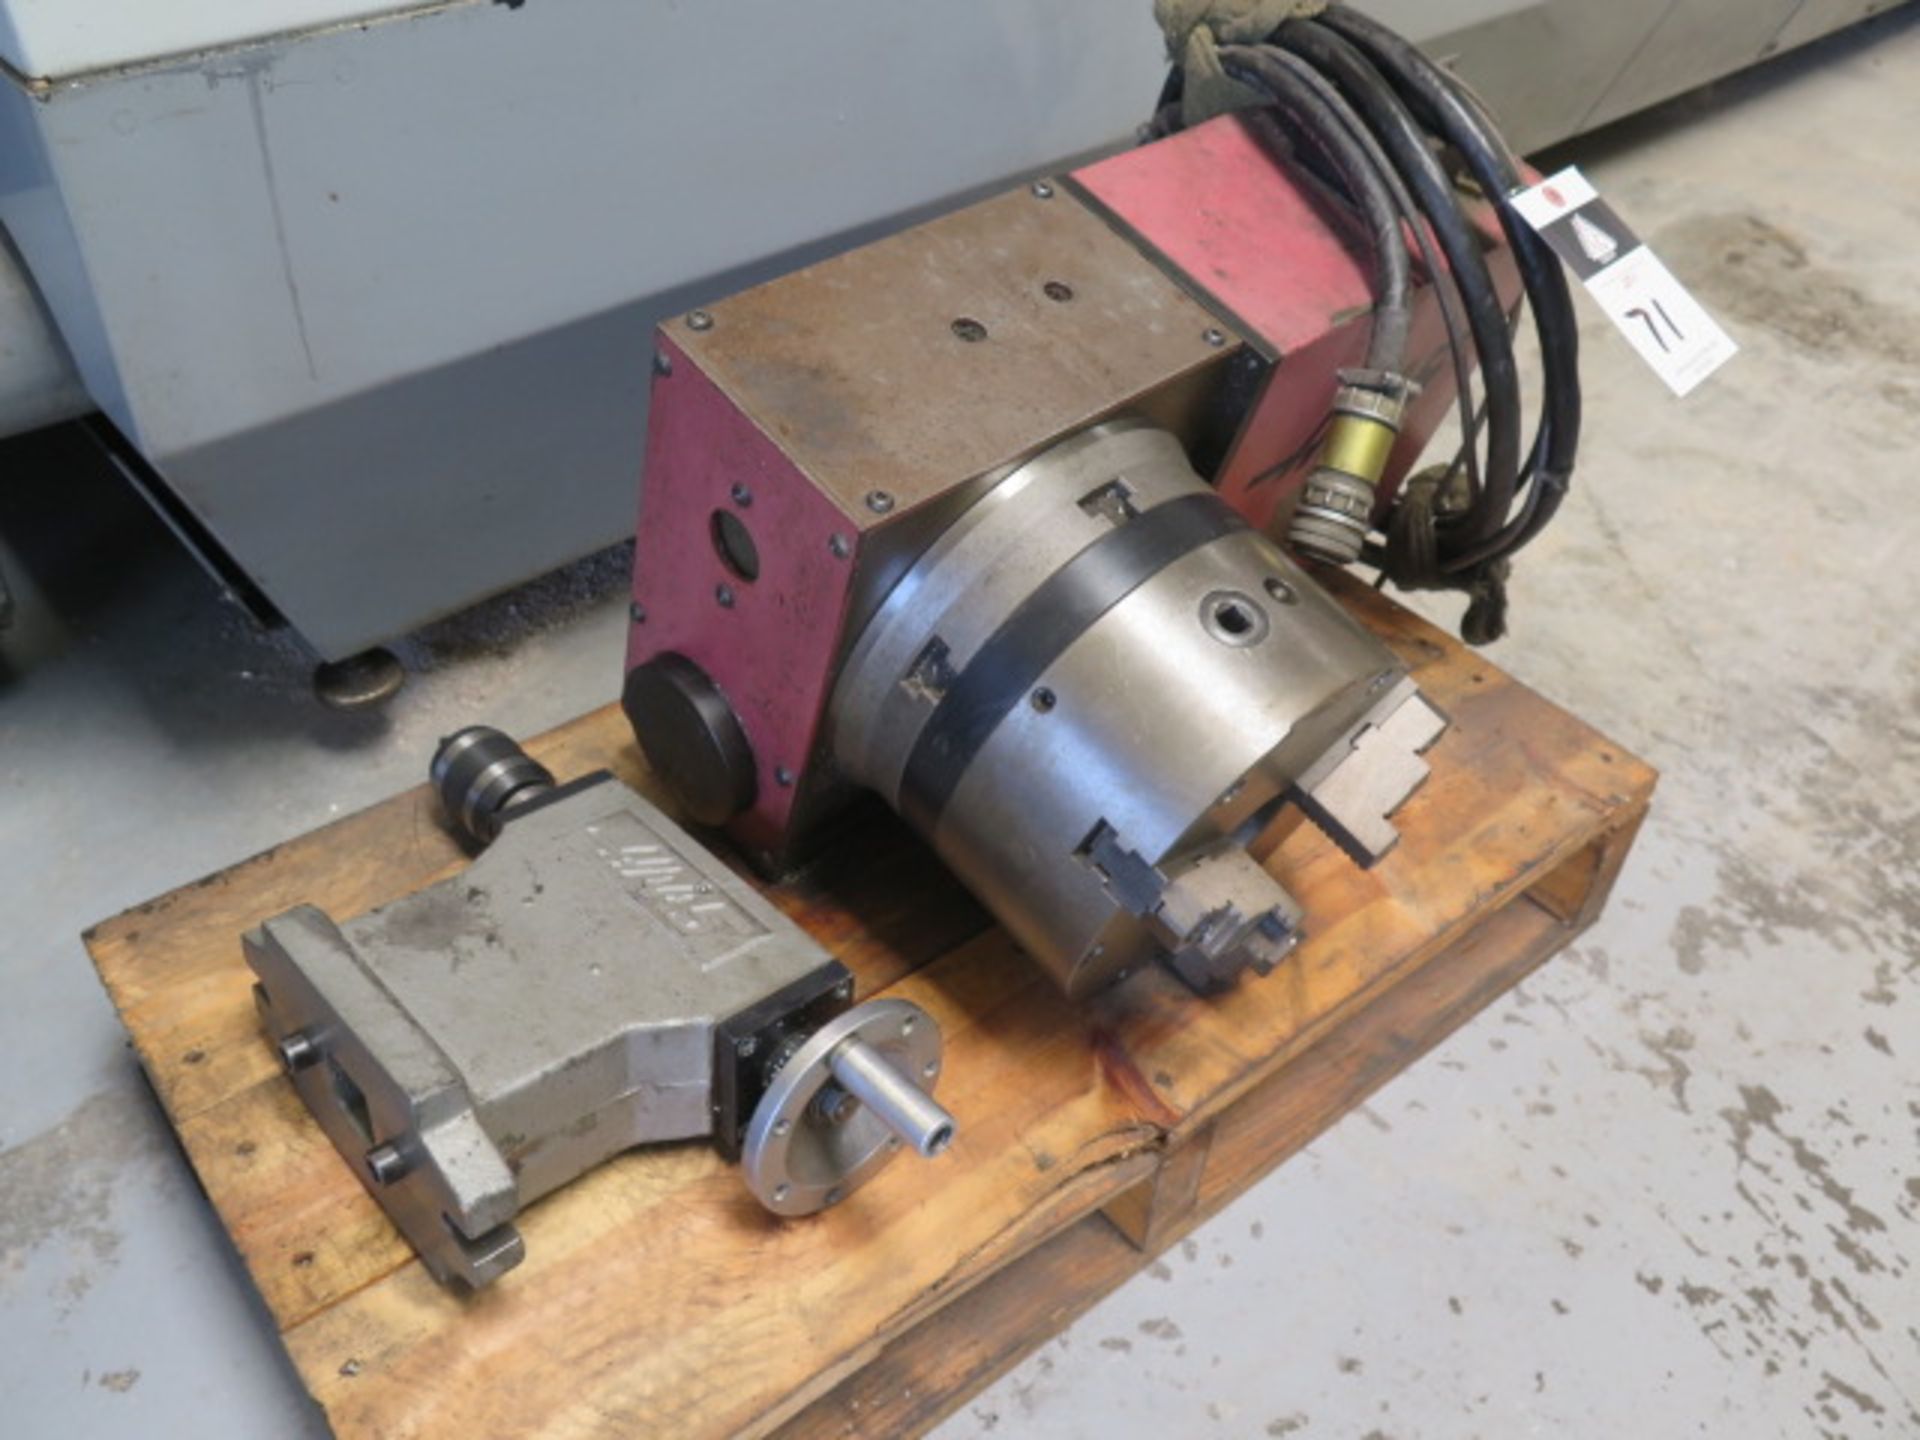 Haas HRT-210 4th Axis 8” Rotary Head w/ 8” 3-Jaw Chuck, Mill Center (SOLD AS-IS - NO WARRANTY) - Image 3 of 7